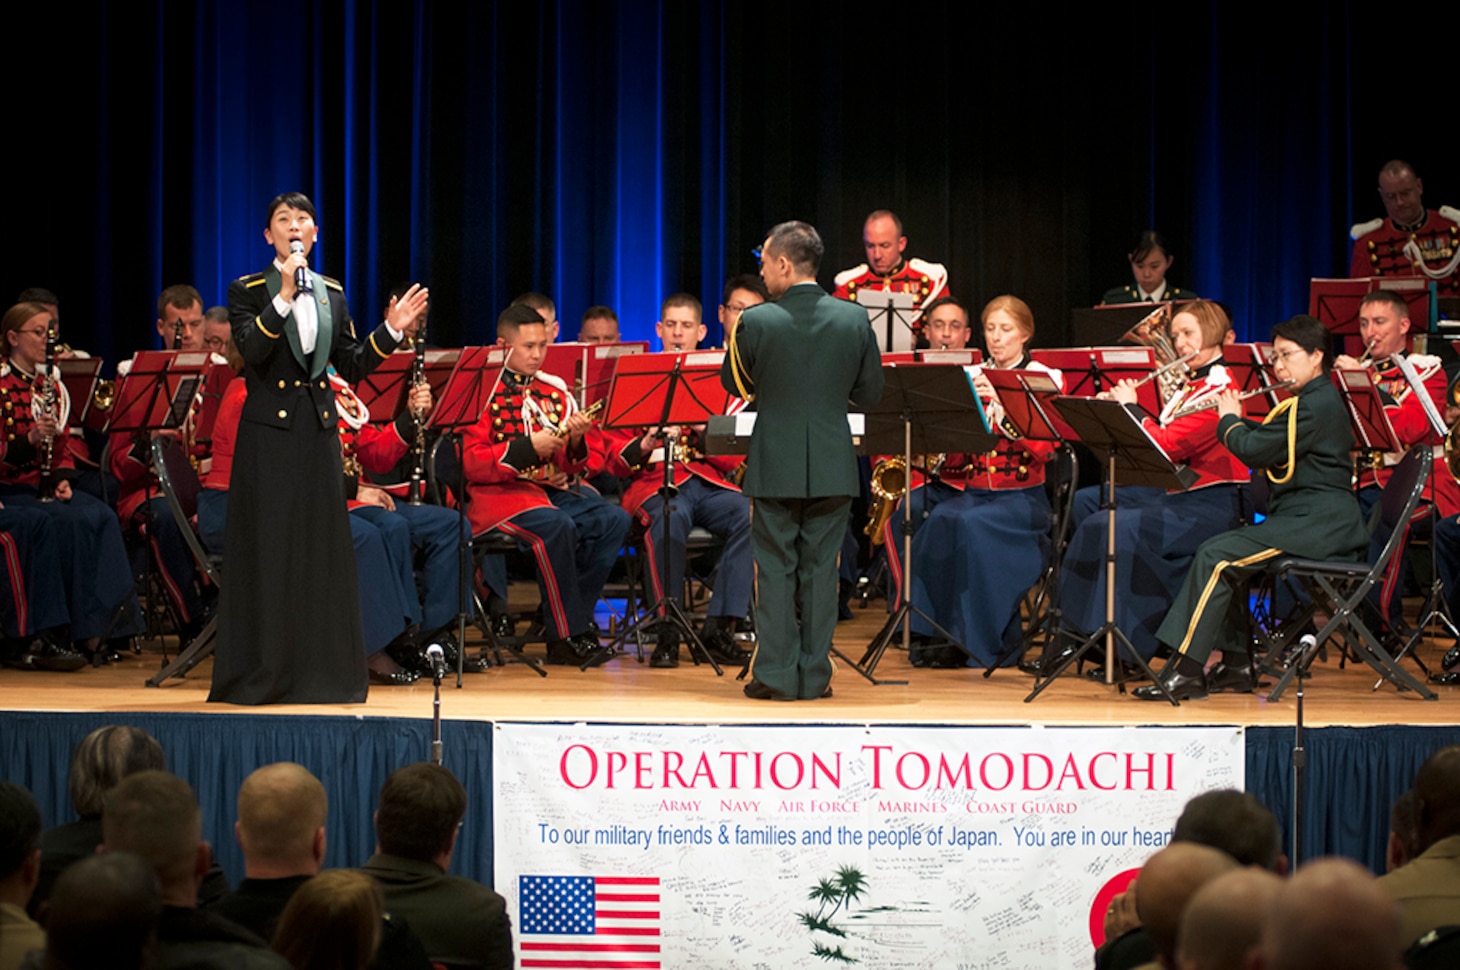 WASHINGTON (March 2, 2016) Members of the U.S. Marine Corps and Japan Self-Defense Force bands perform "Flower will Bloom" during a commemoration ceremony for the 5 year anniversary of Operation Tomodachi at the Pentagon. Operation Tomodachi was a humanitarian mission focused on aiding the people of Japan in the aftermath of the massive earthquake and tsunami that struck Fukushima Prefecture in early March of 2011. 